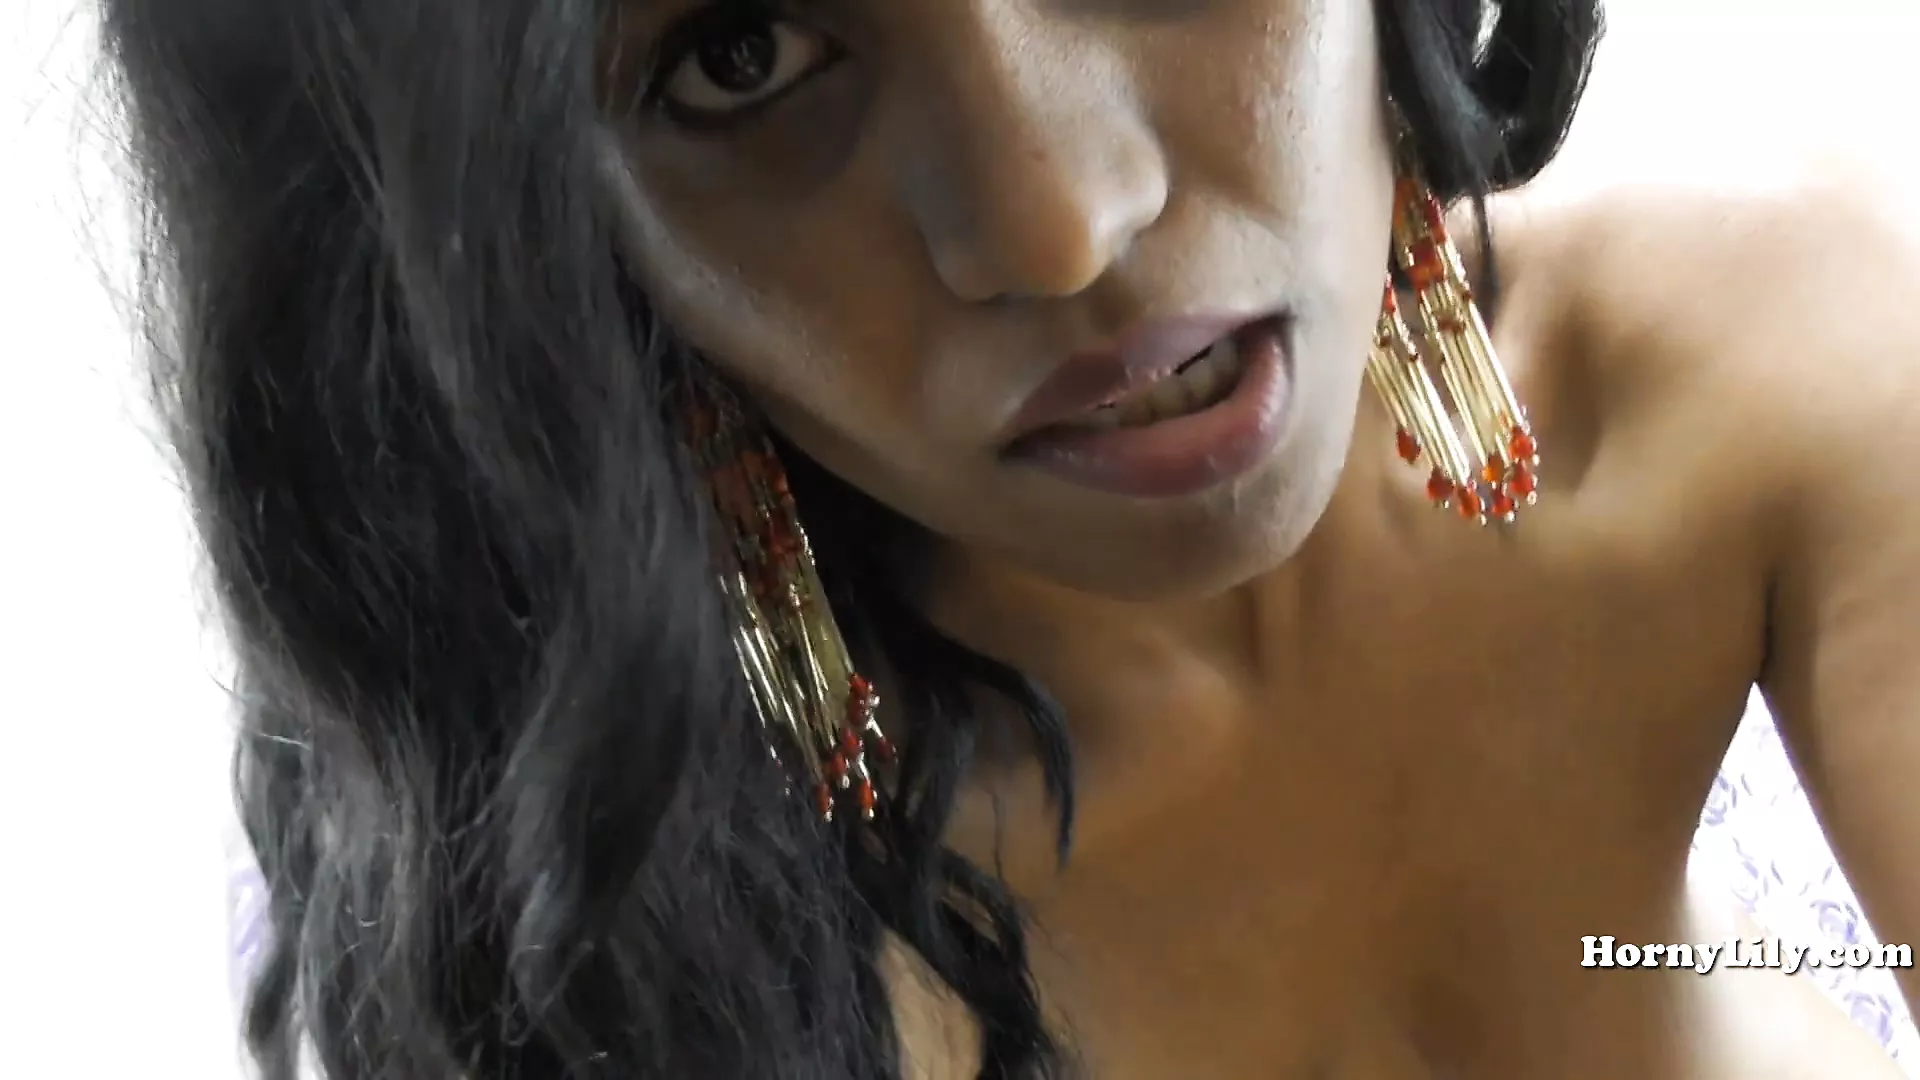 Dominating Indian sexy boss fucking employee pov roleplay